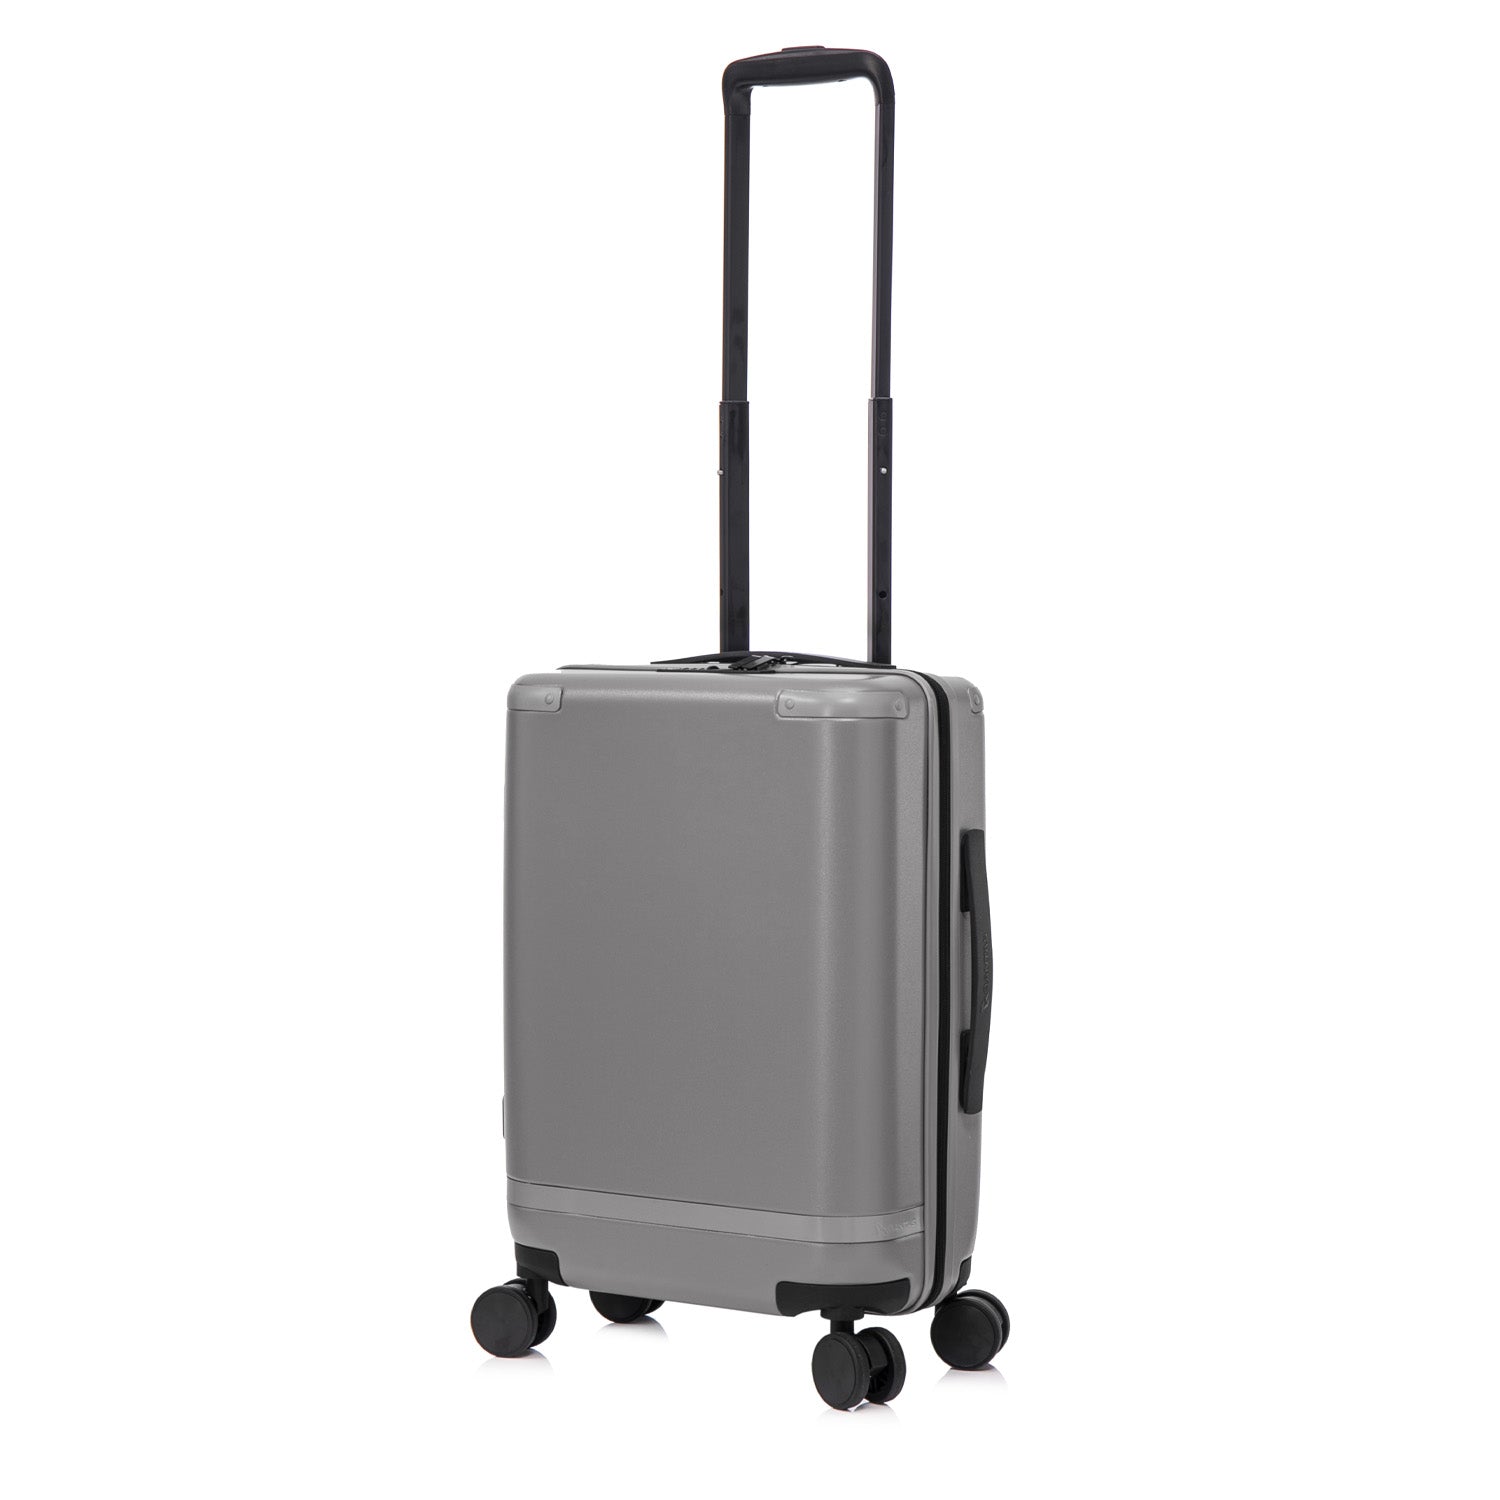 Qantas- QF250 ROME 56cm Small cabin spinner suitcase - Charcoal-2